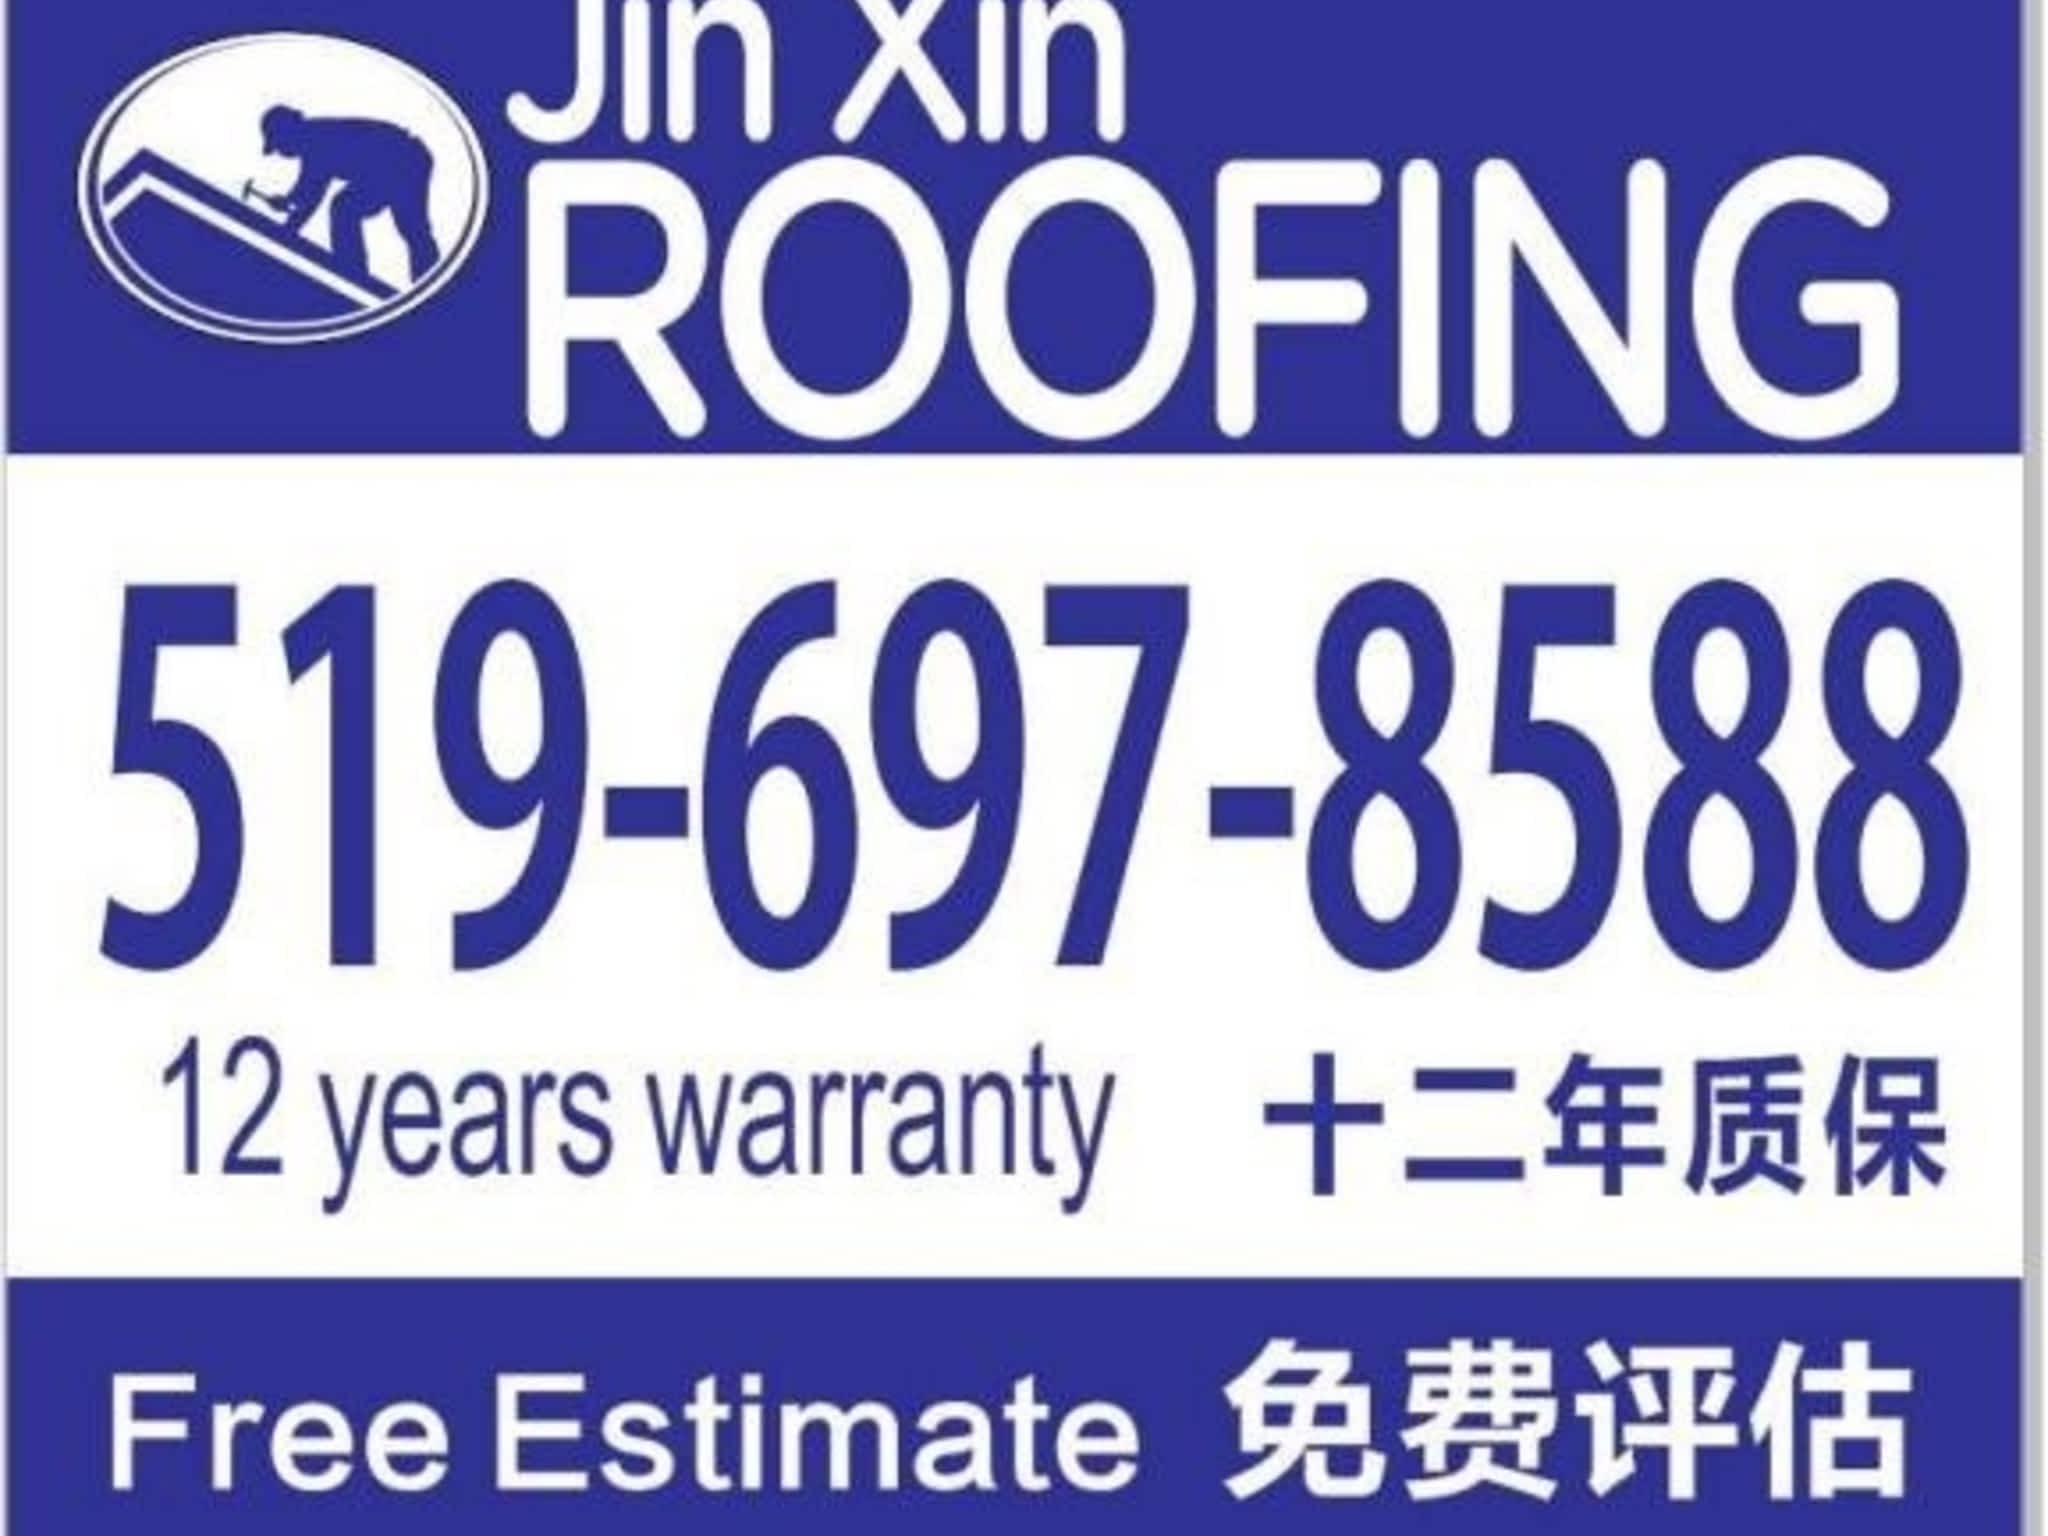 photo Jin Xin Roofing